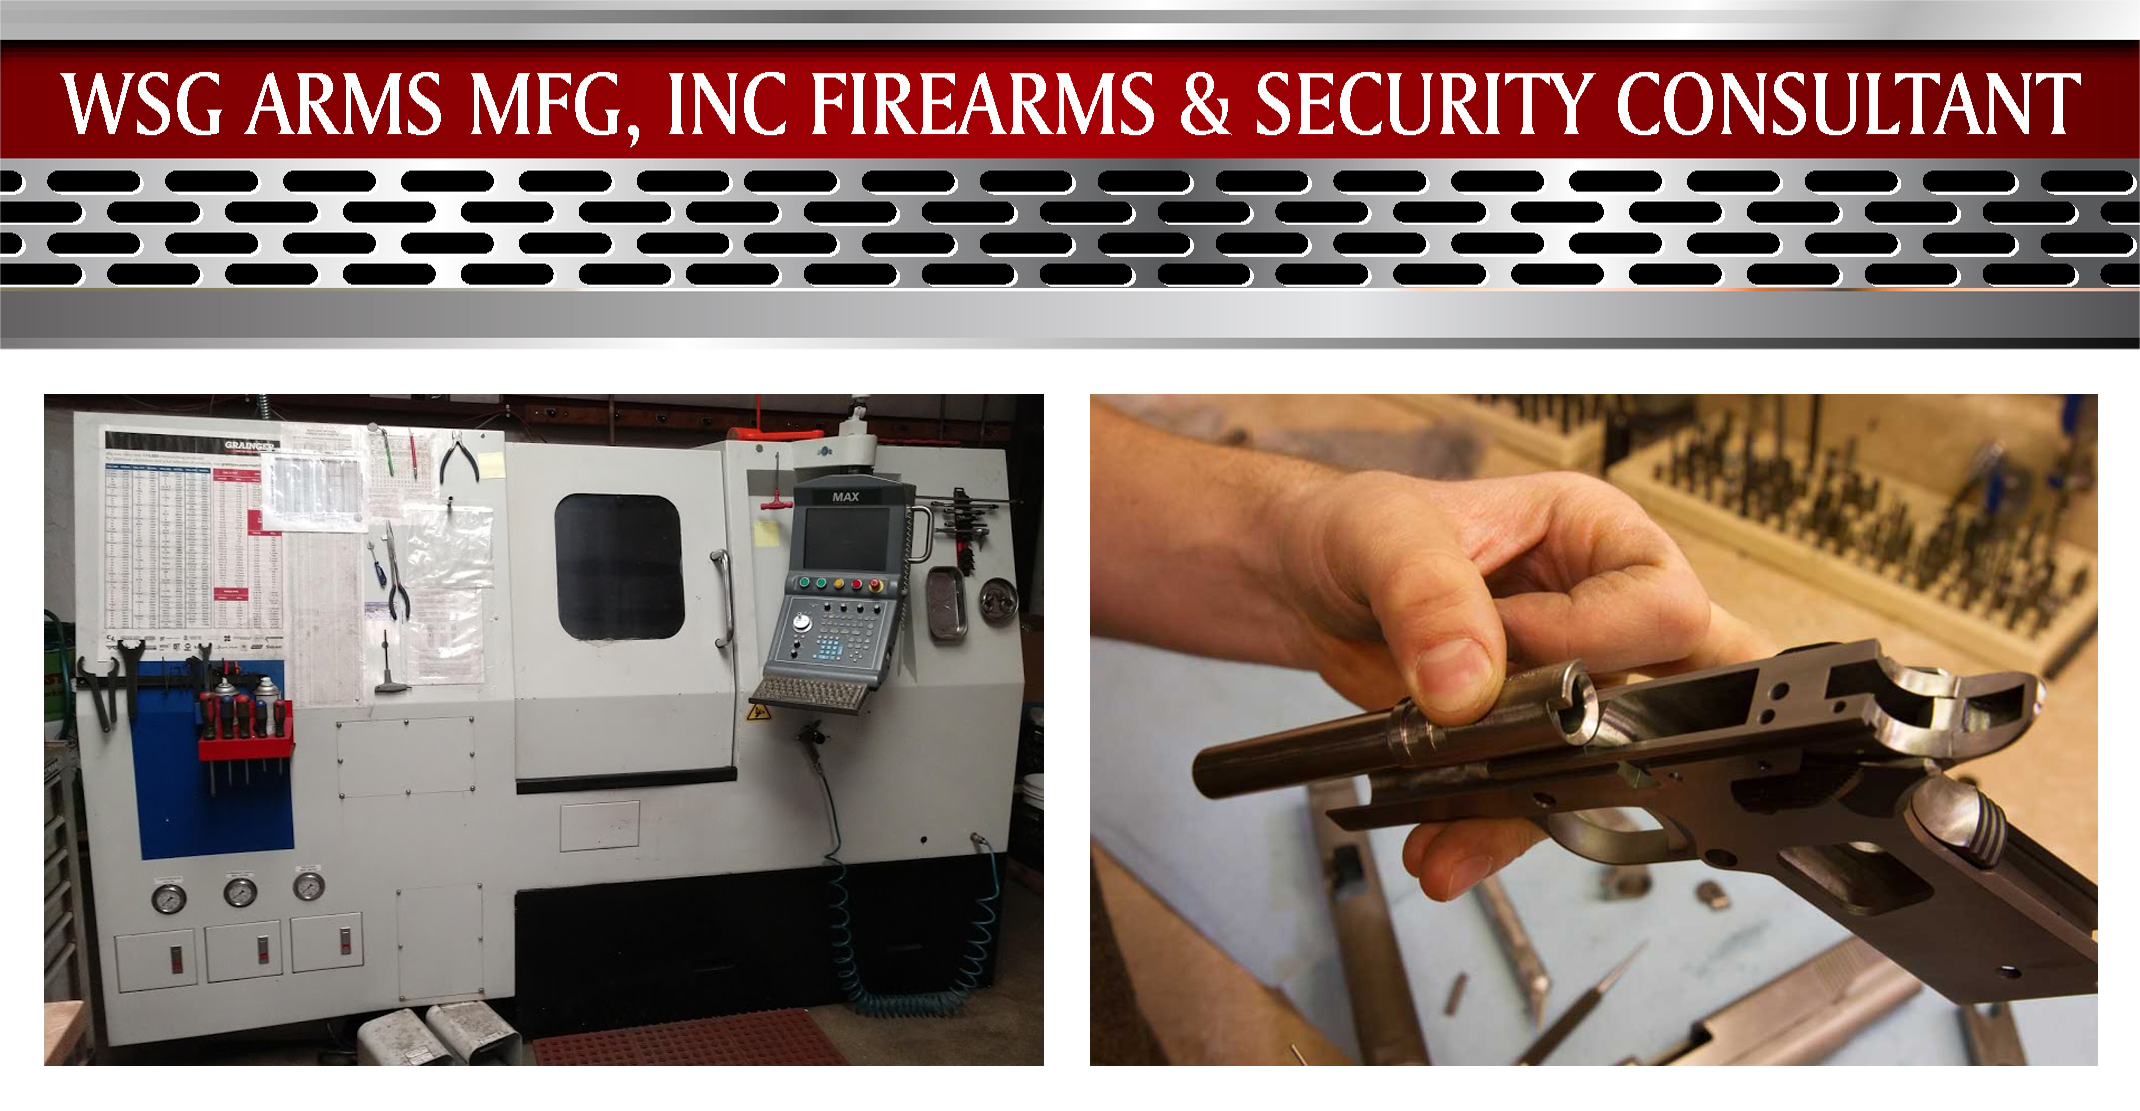 WSG Arms will provide law enforcement, military, defense, and related training, training development, and accreditation available both domestically and internationally, to include specific security details for its customer.